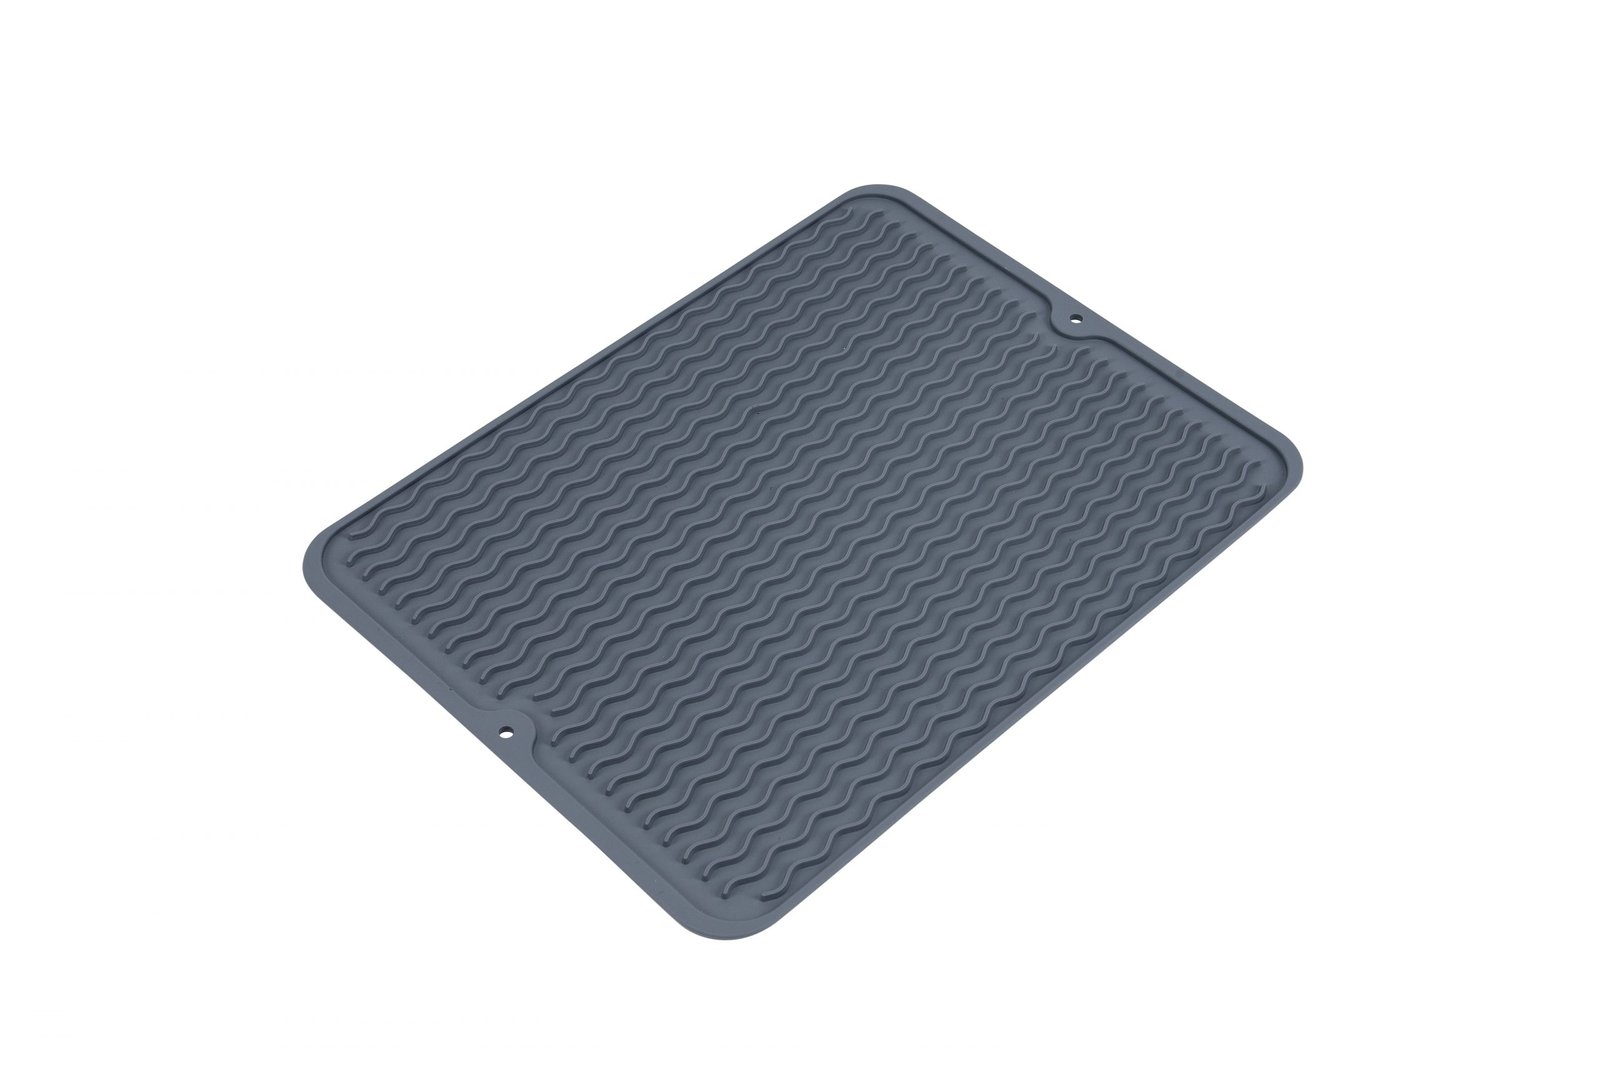 https://www.wetopsilicone.com/wp-content/uploads/2021/04/Custom-Silicone-Dish-Drying-Mat-for-Sink-and-Counter-scaled.jpg